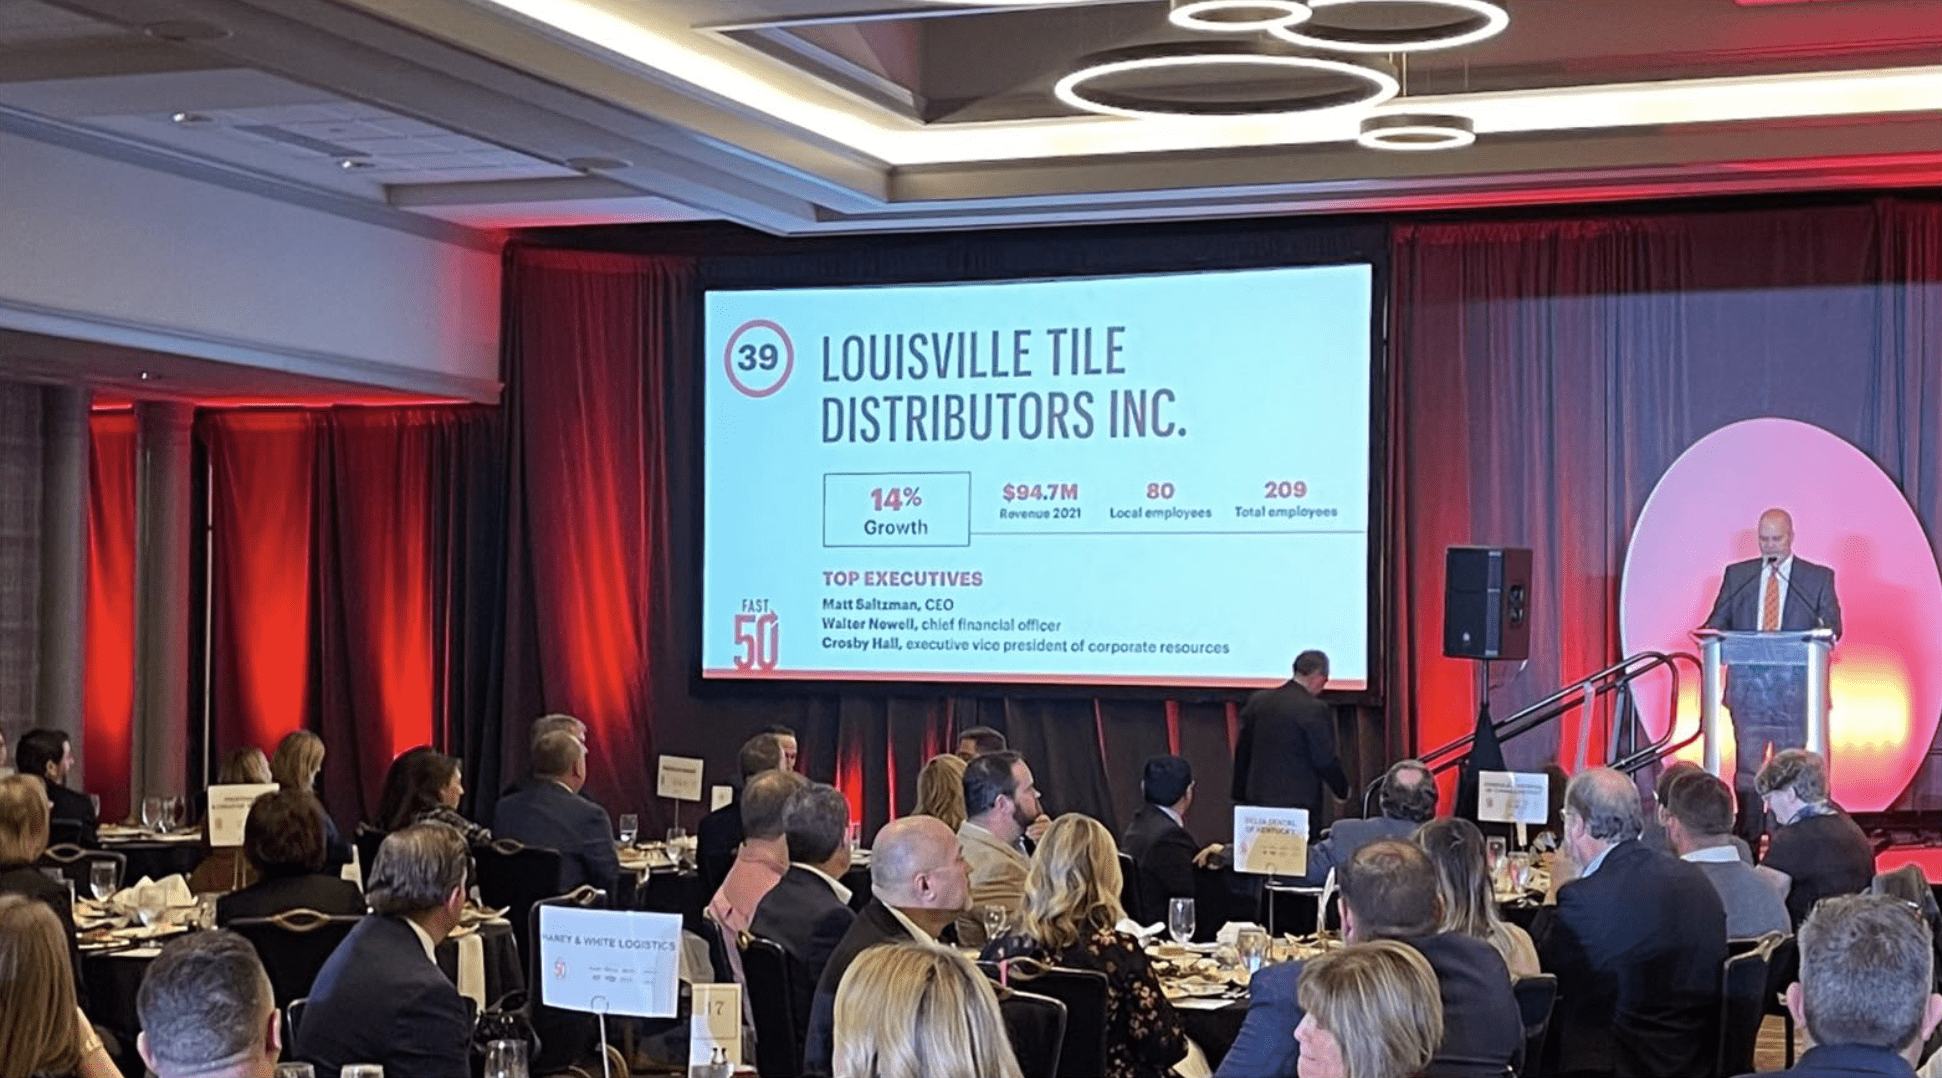 Dub Newell promoted to CEO of Louisville Tile – Louisville Tile